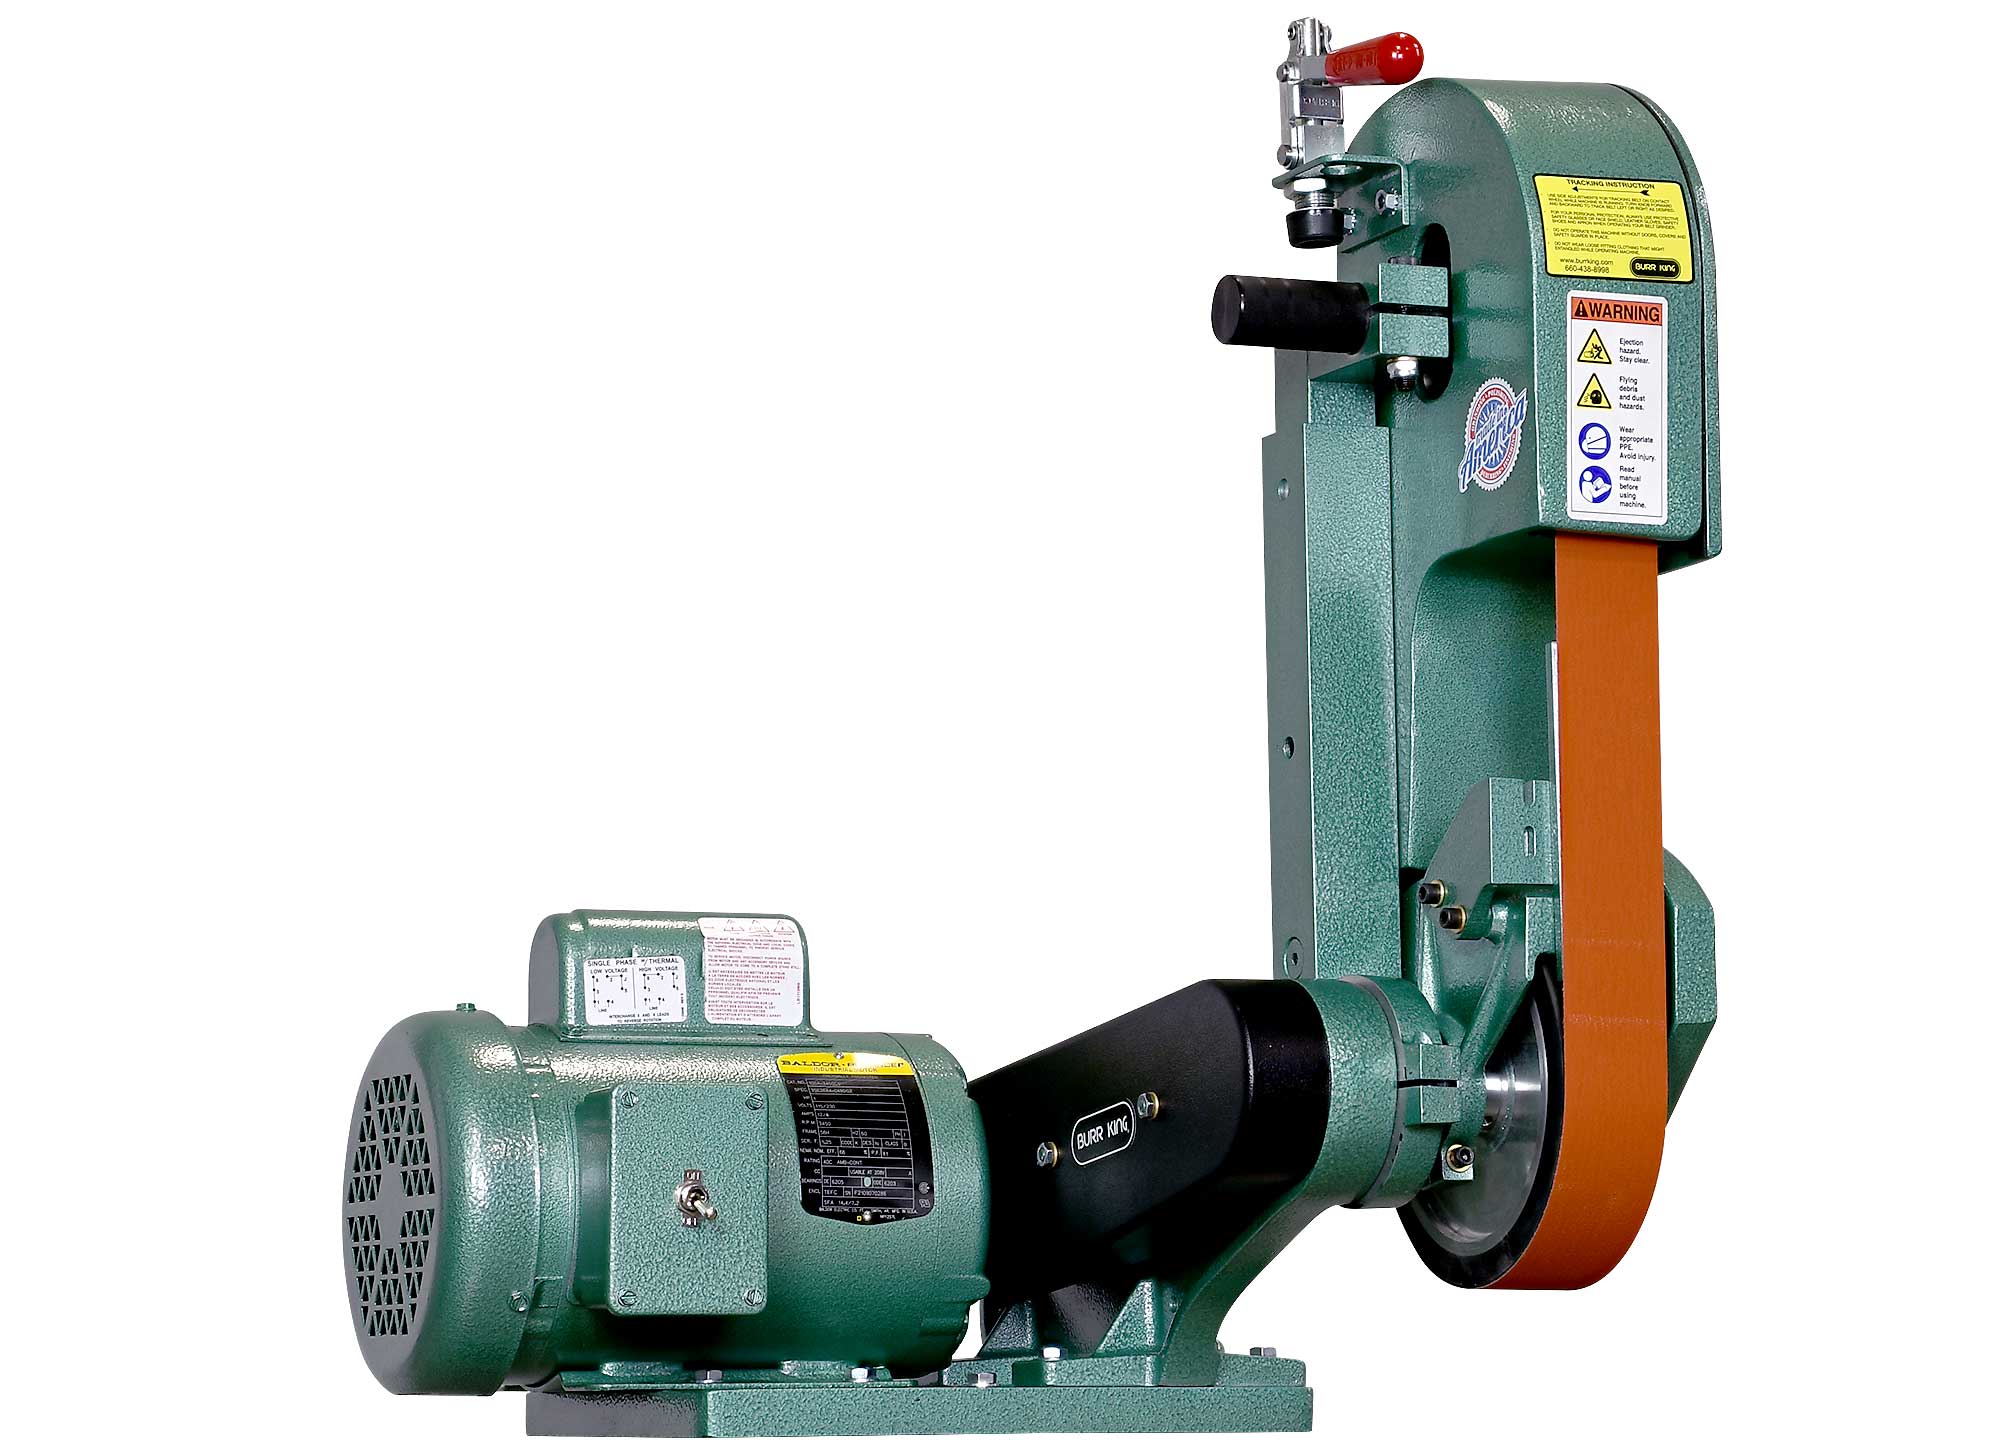 24820 fixed speed X400 Belt Grinder remove the workrest and have full access to the 55 duro rubber contact wheel.